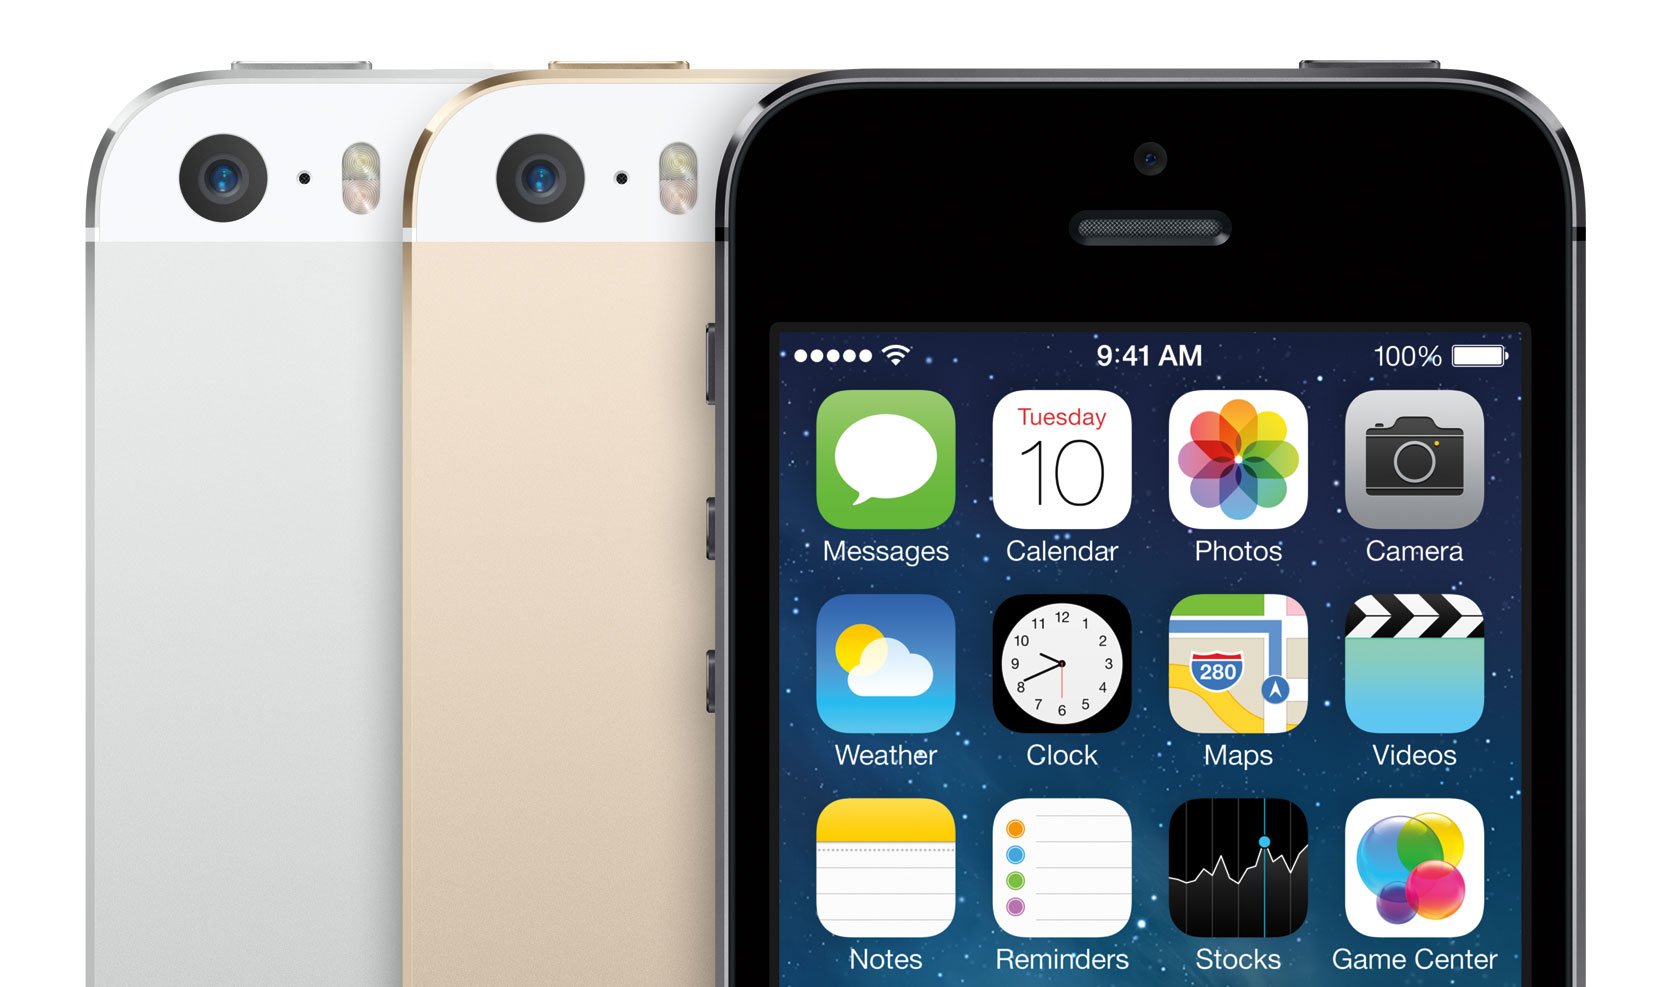 The Verizon iPhone 5s is a good choice thanks to a finished 4G LTE network.